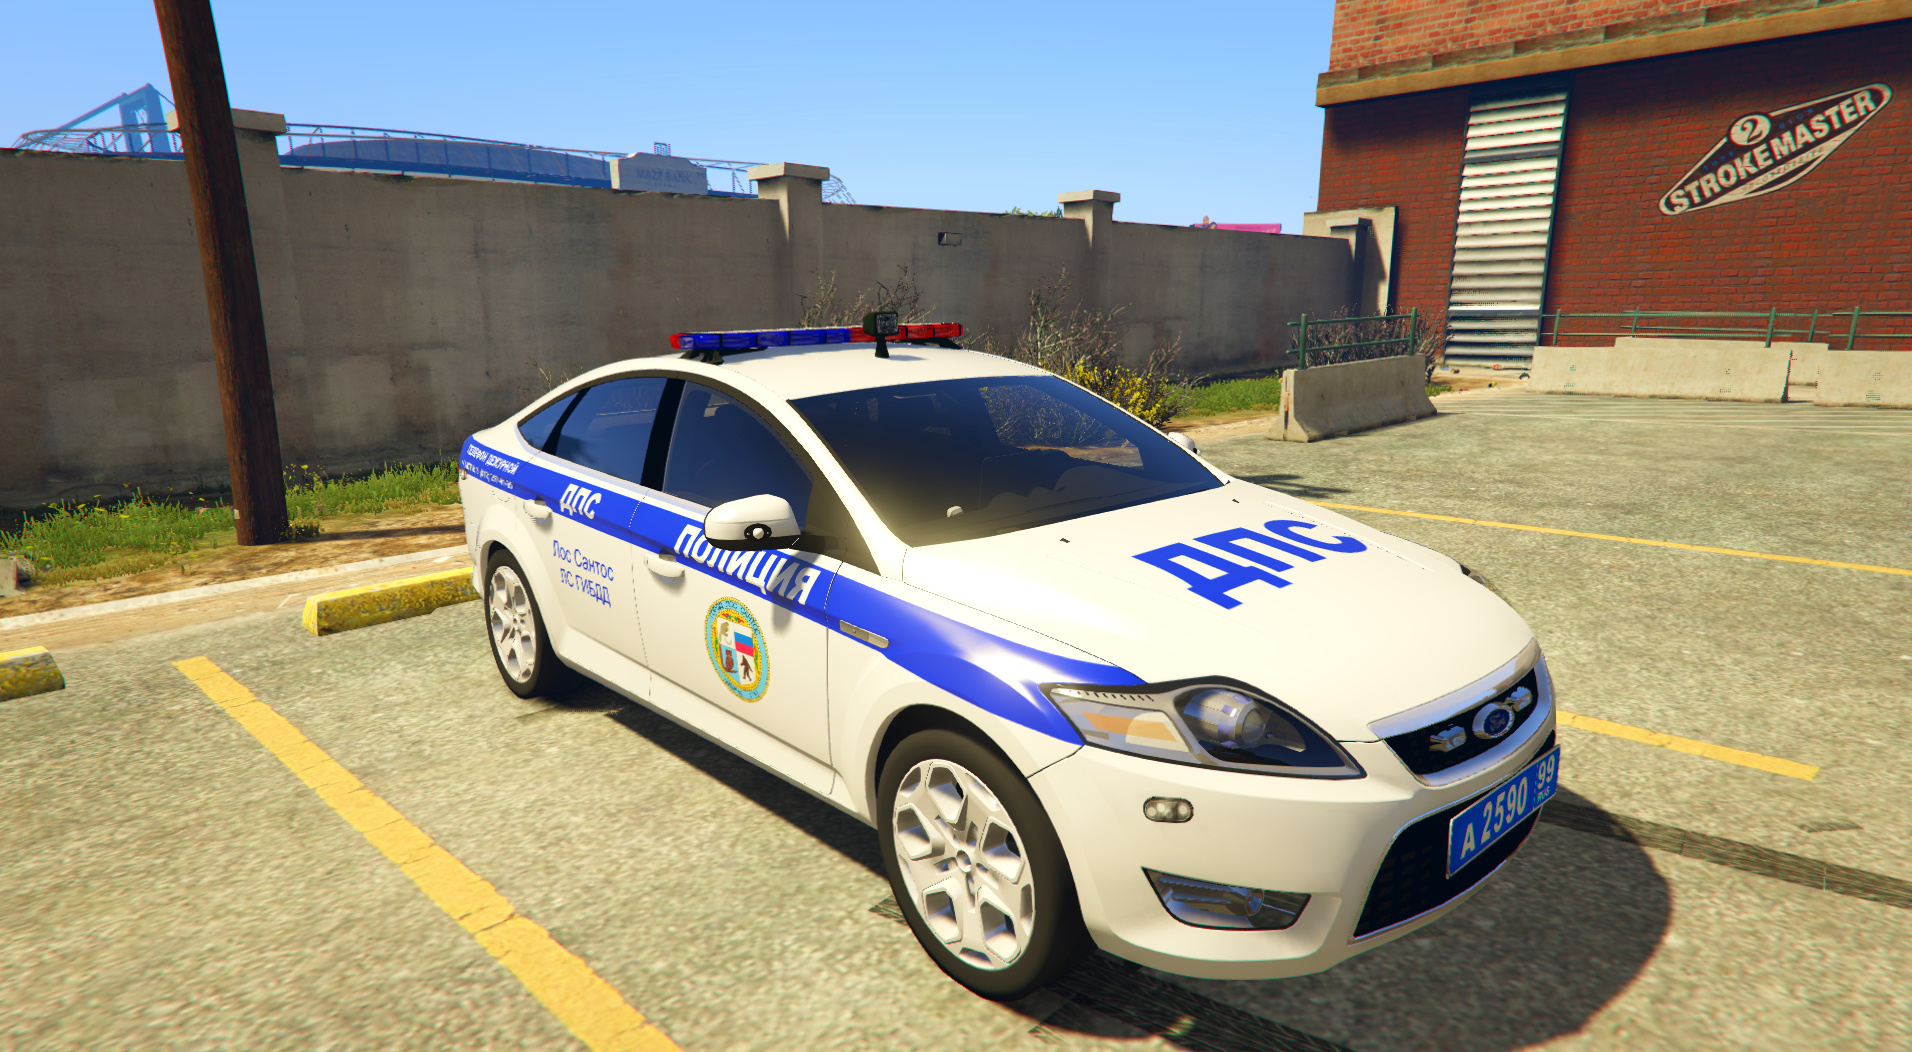 Ford Mondeo Police